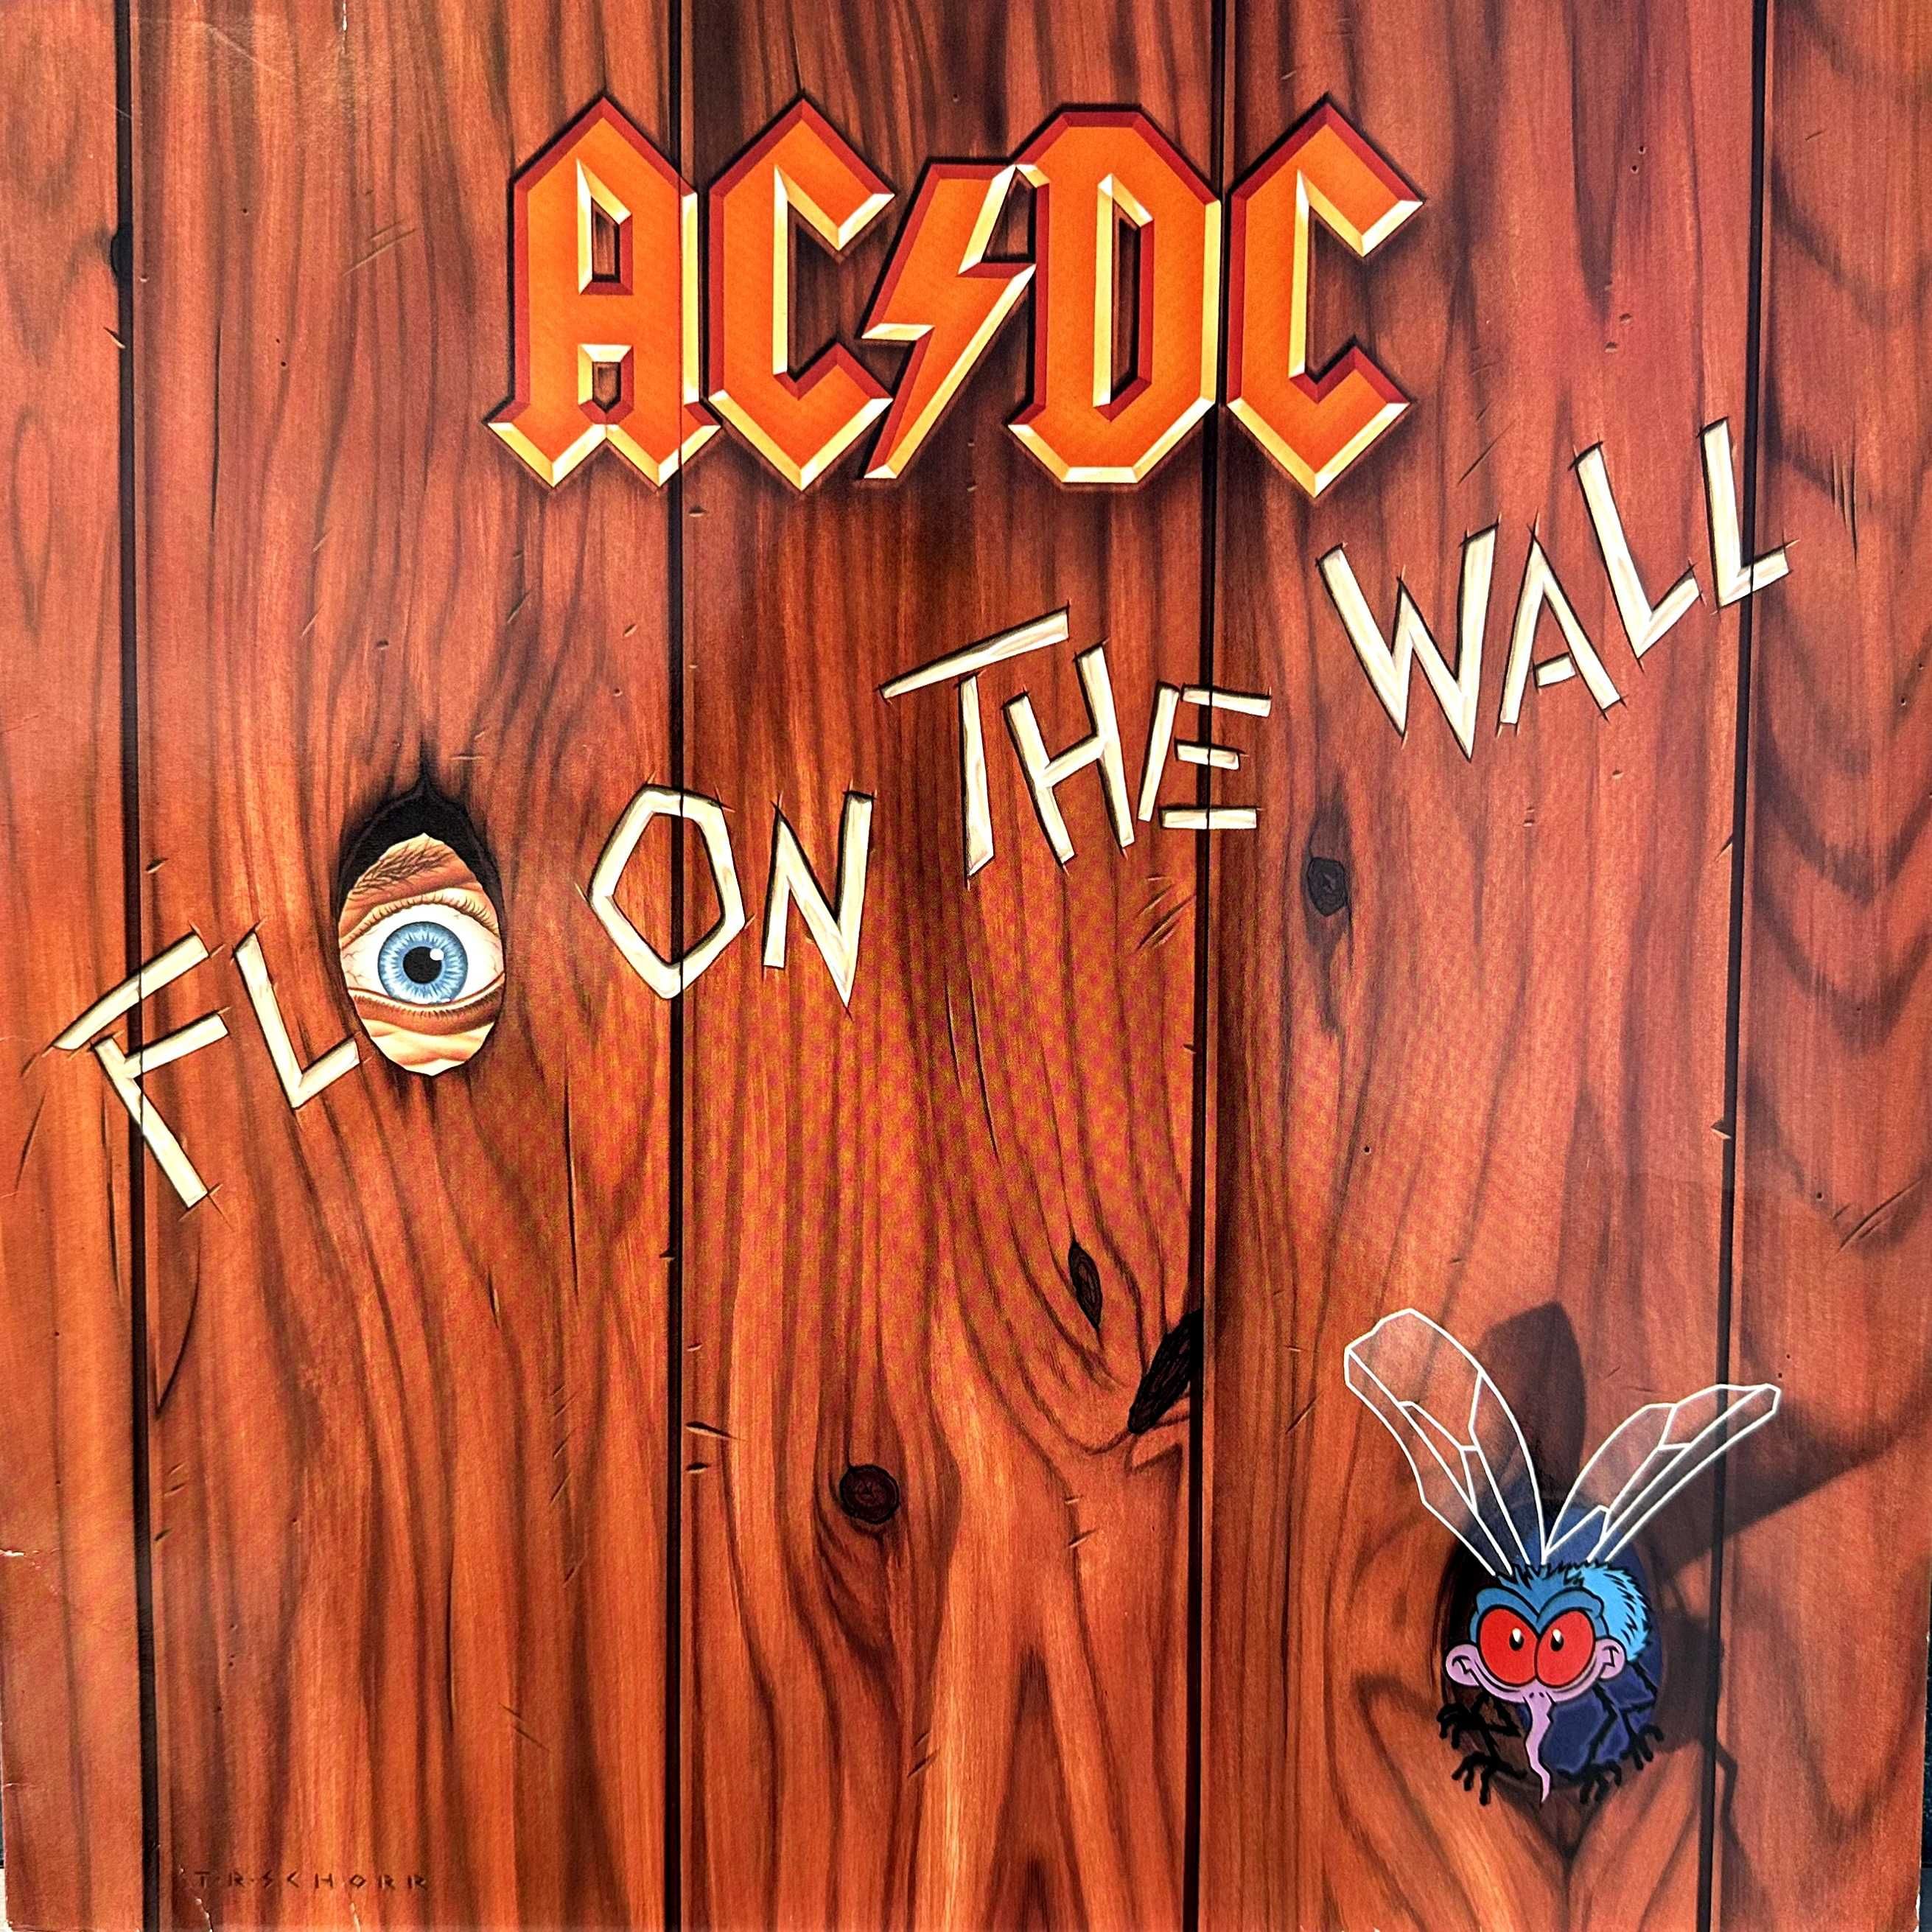 AC/DC - Fly on the Wall (Vinyl, 1985, Germany)